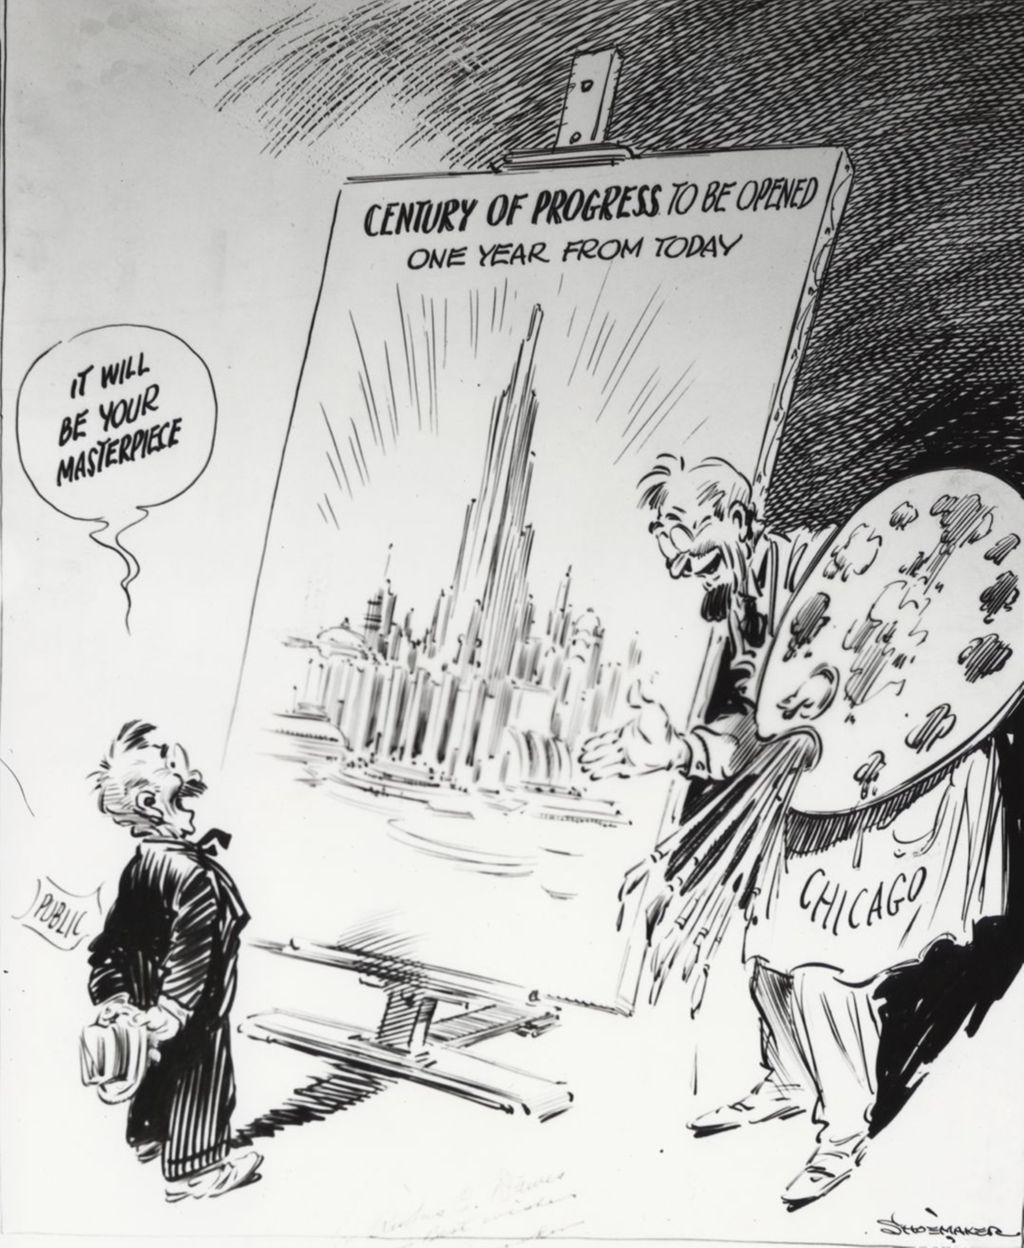 Miniature of Vaughn Shoemaker's 1932 Chicago Daily News cartoon depicting his iconic character John Q. Public, telling the artist "Chicago" that his painting announcing the grand opening of A Century of Progress will be a masterpiece.